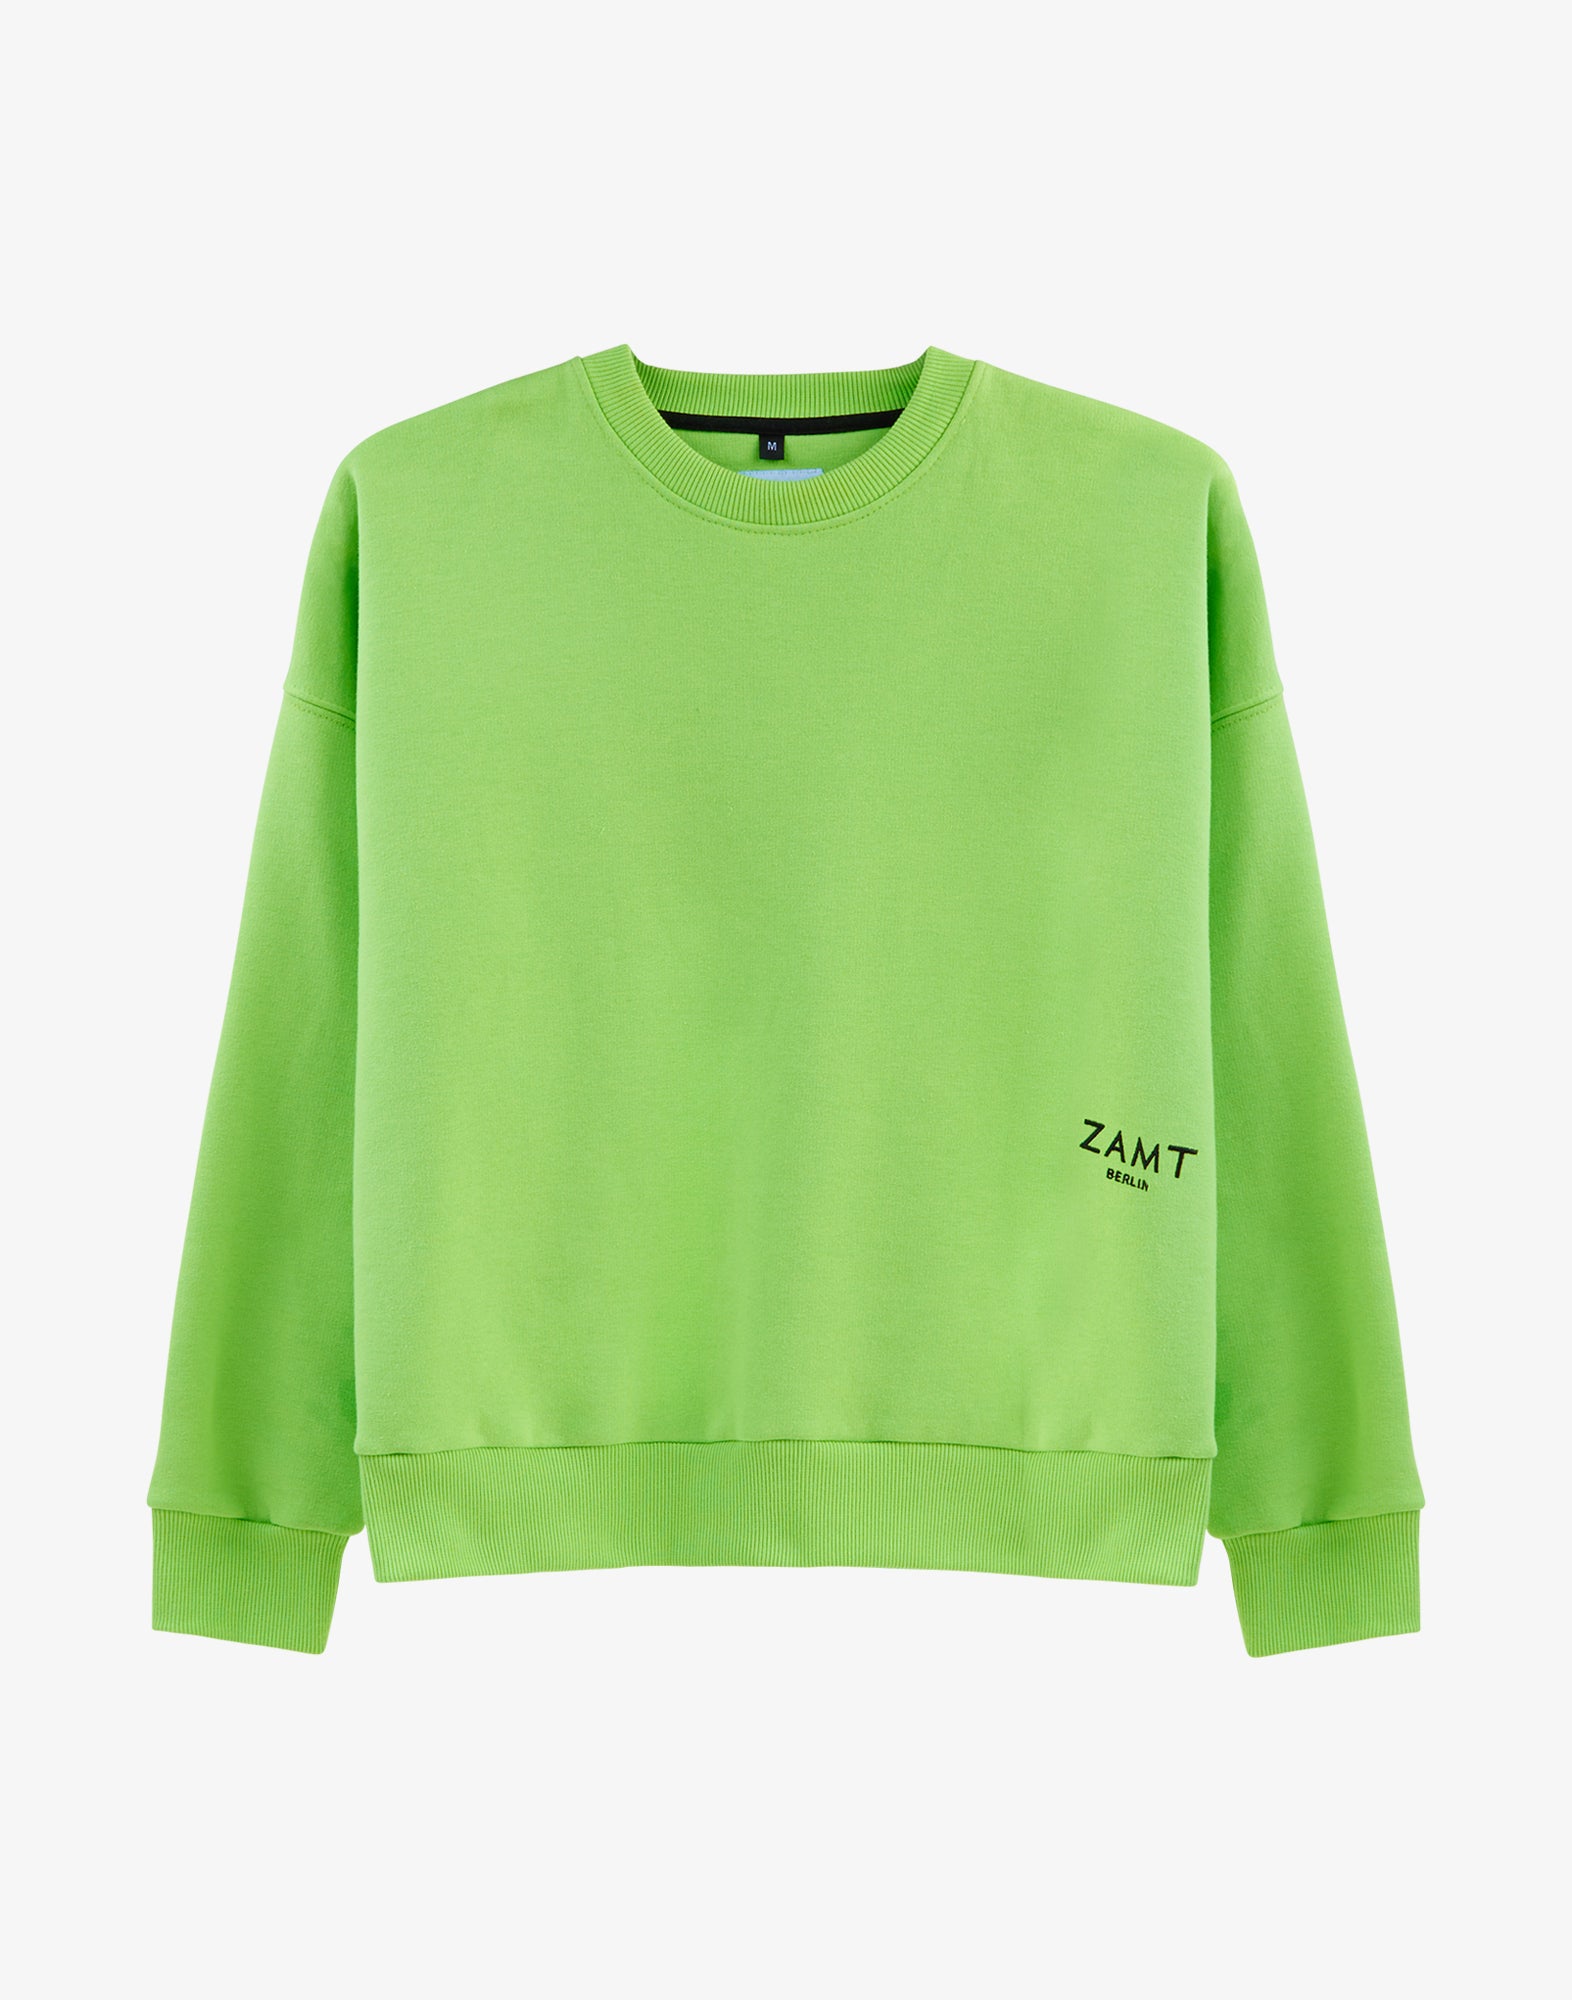 FAVORITE_01_SWEATER_LIME_Designed_in_Berlin_Made_to_last_Handmade_in_Poland.